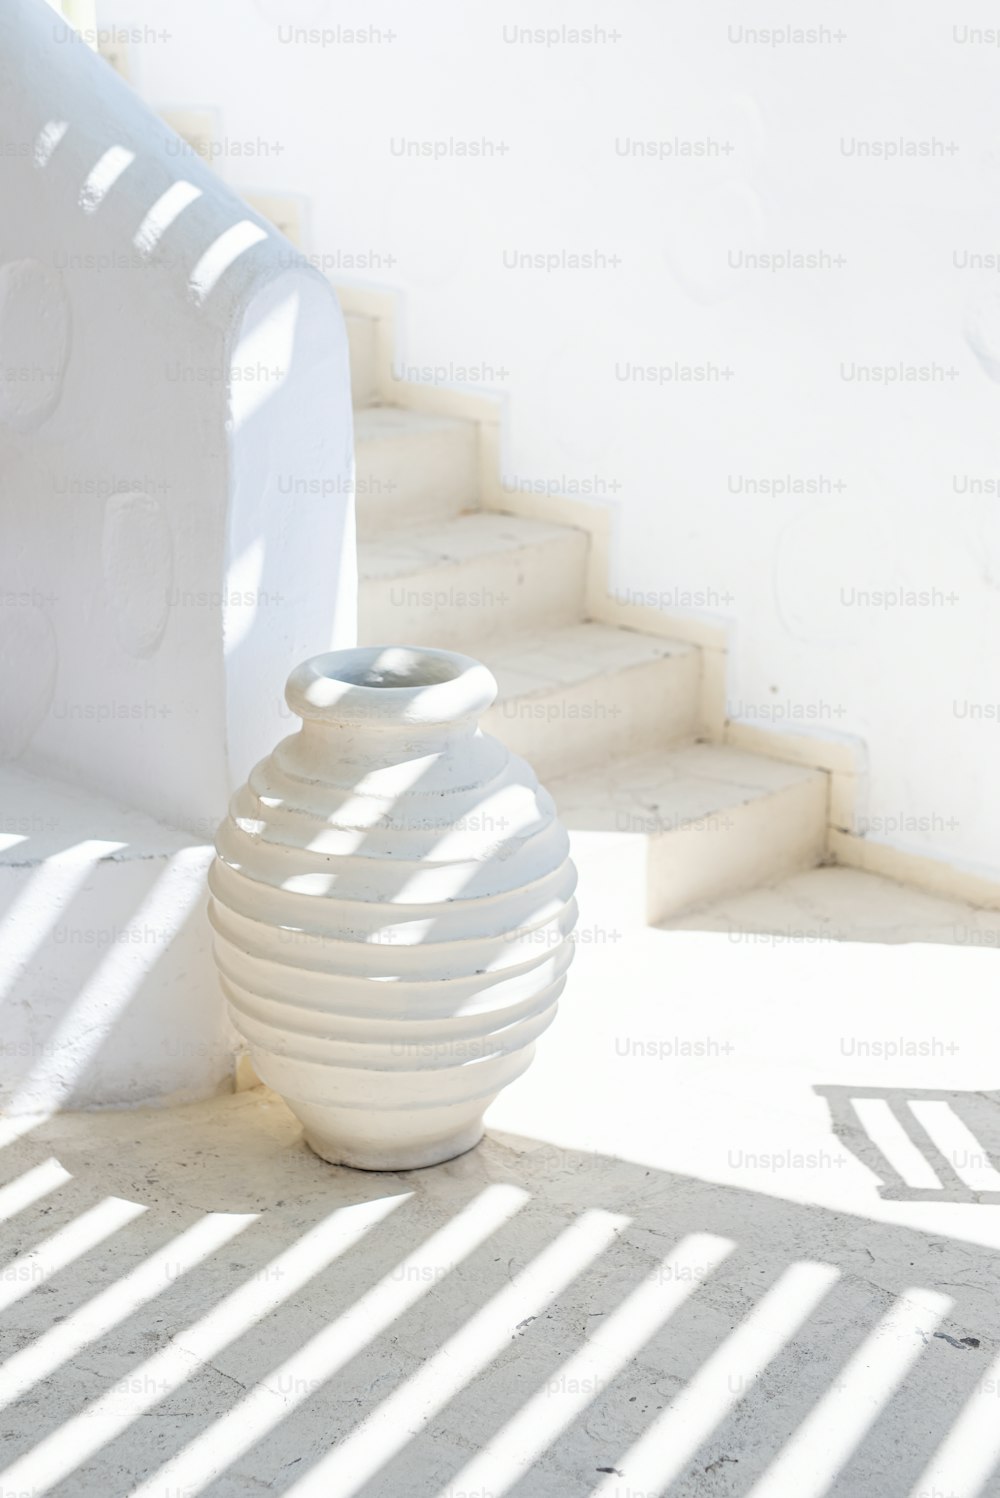 a white vase sitting on the ground next to some stairs